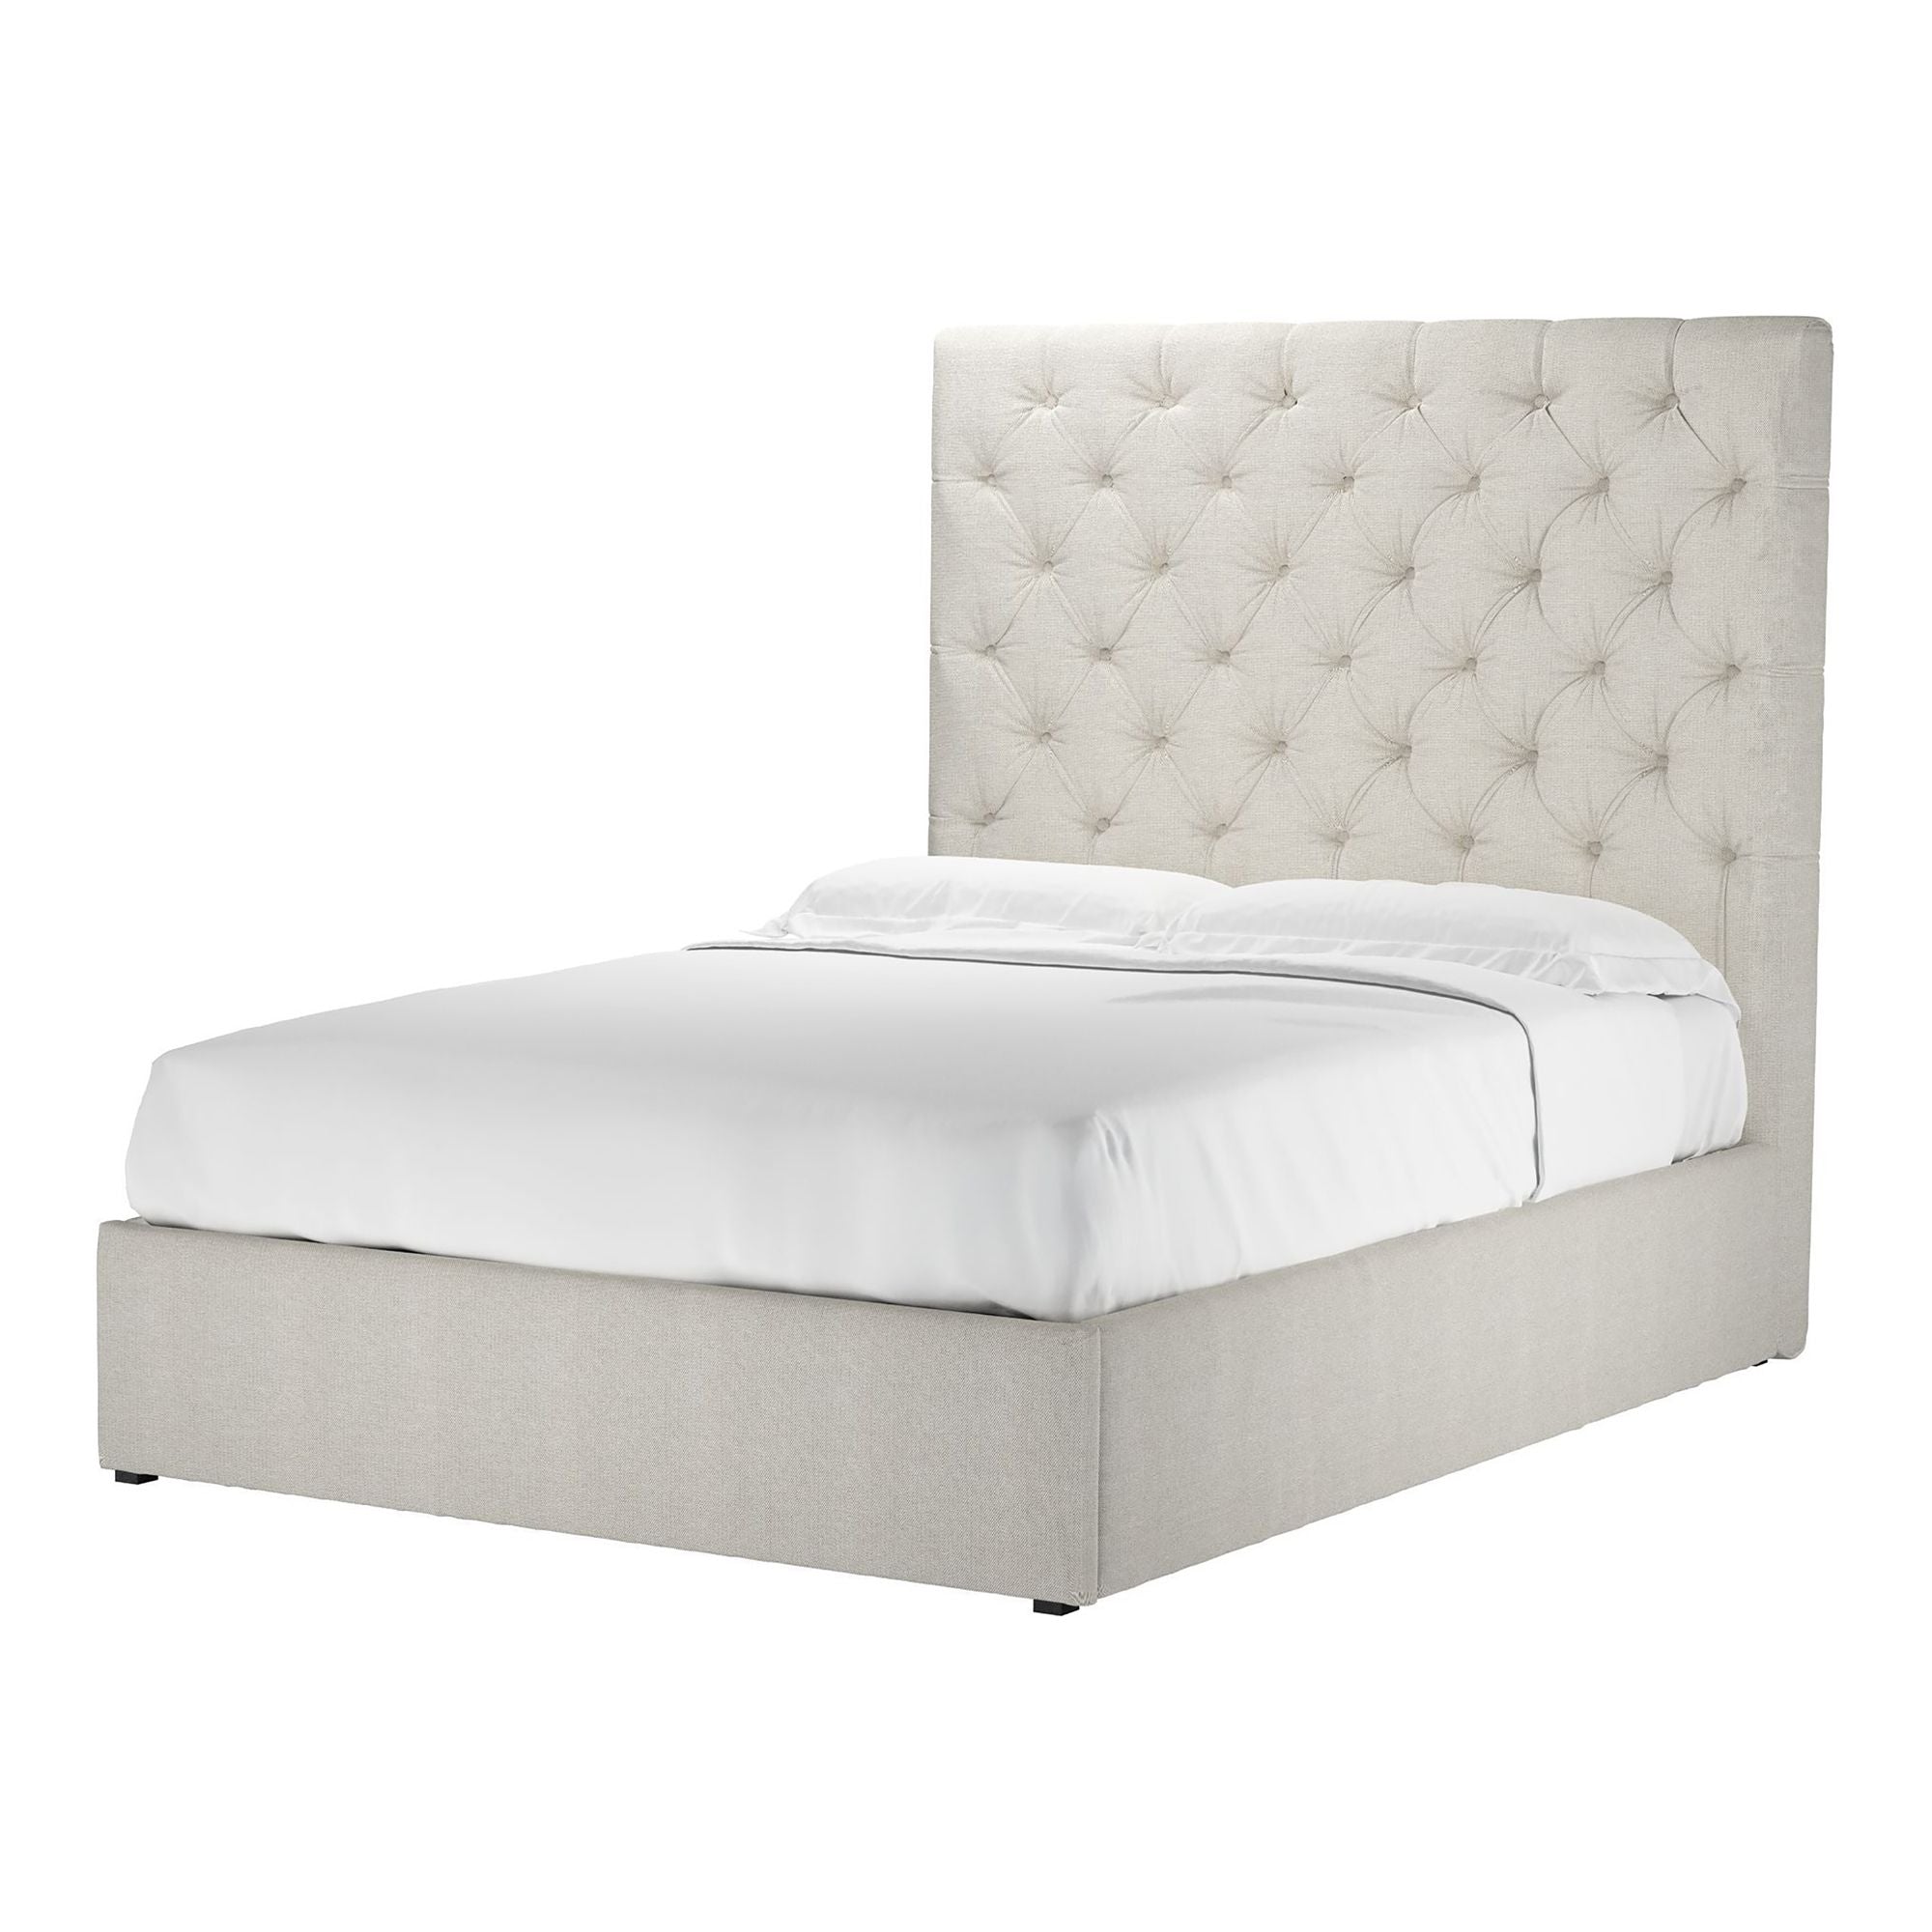 Rosalie Clay House Basket Weave Ottoman Bed - Double Size